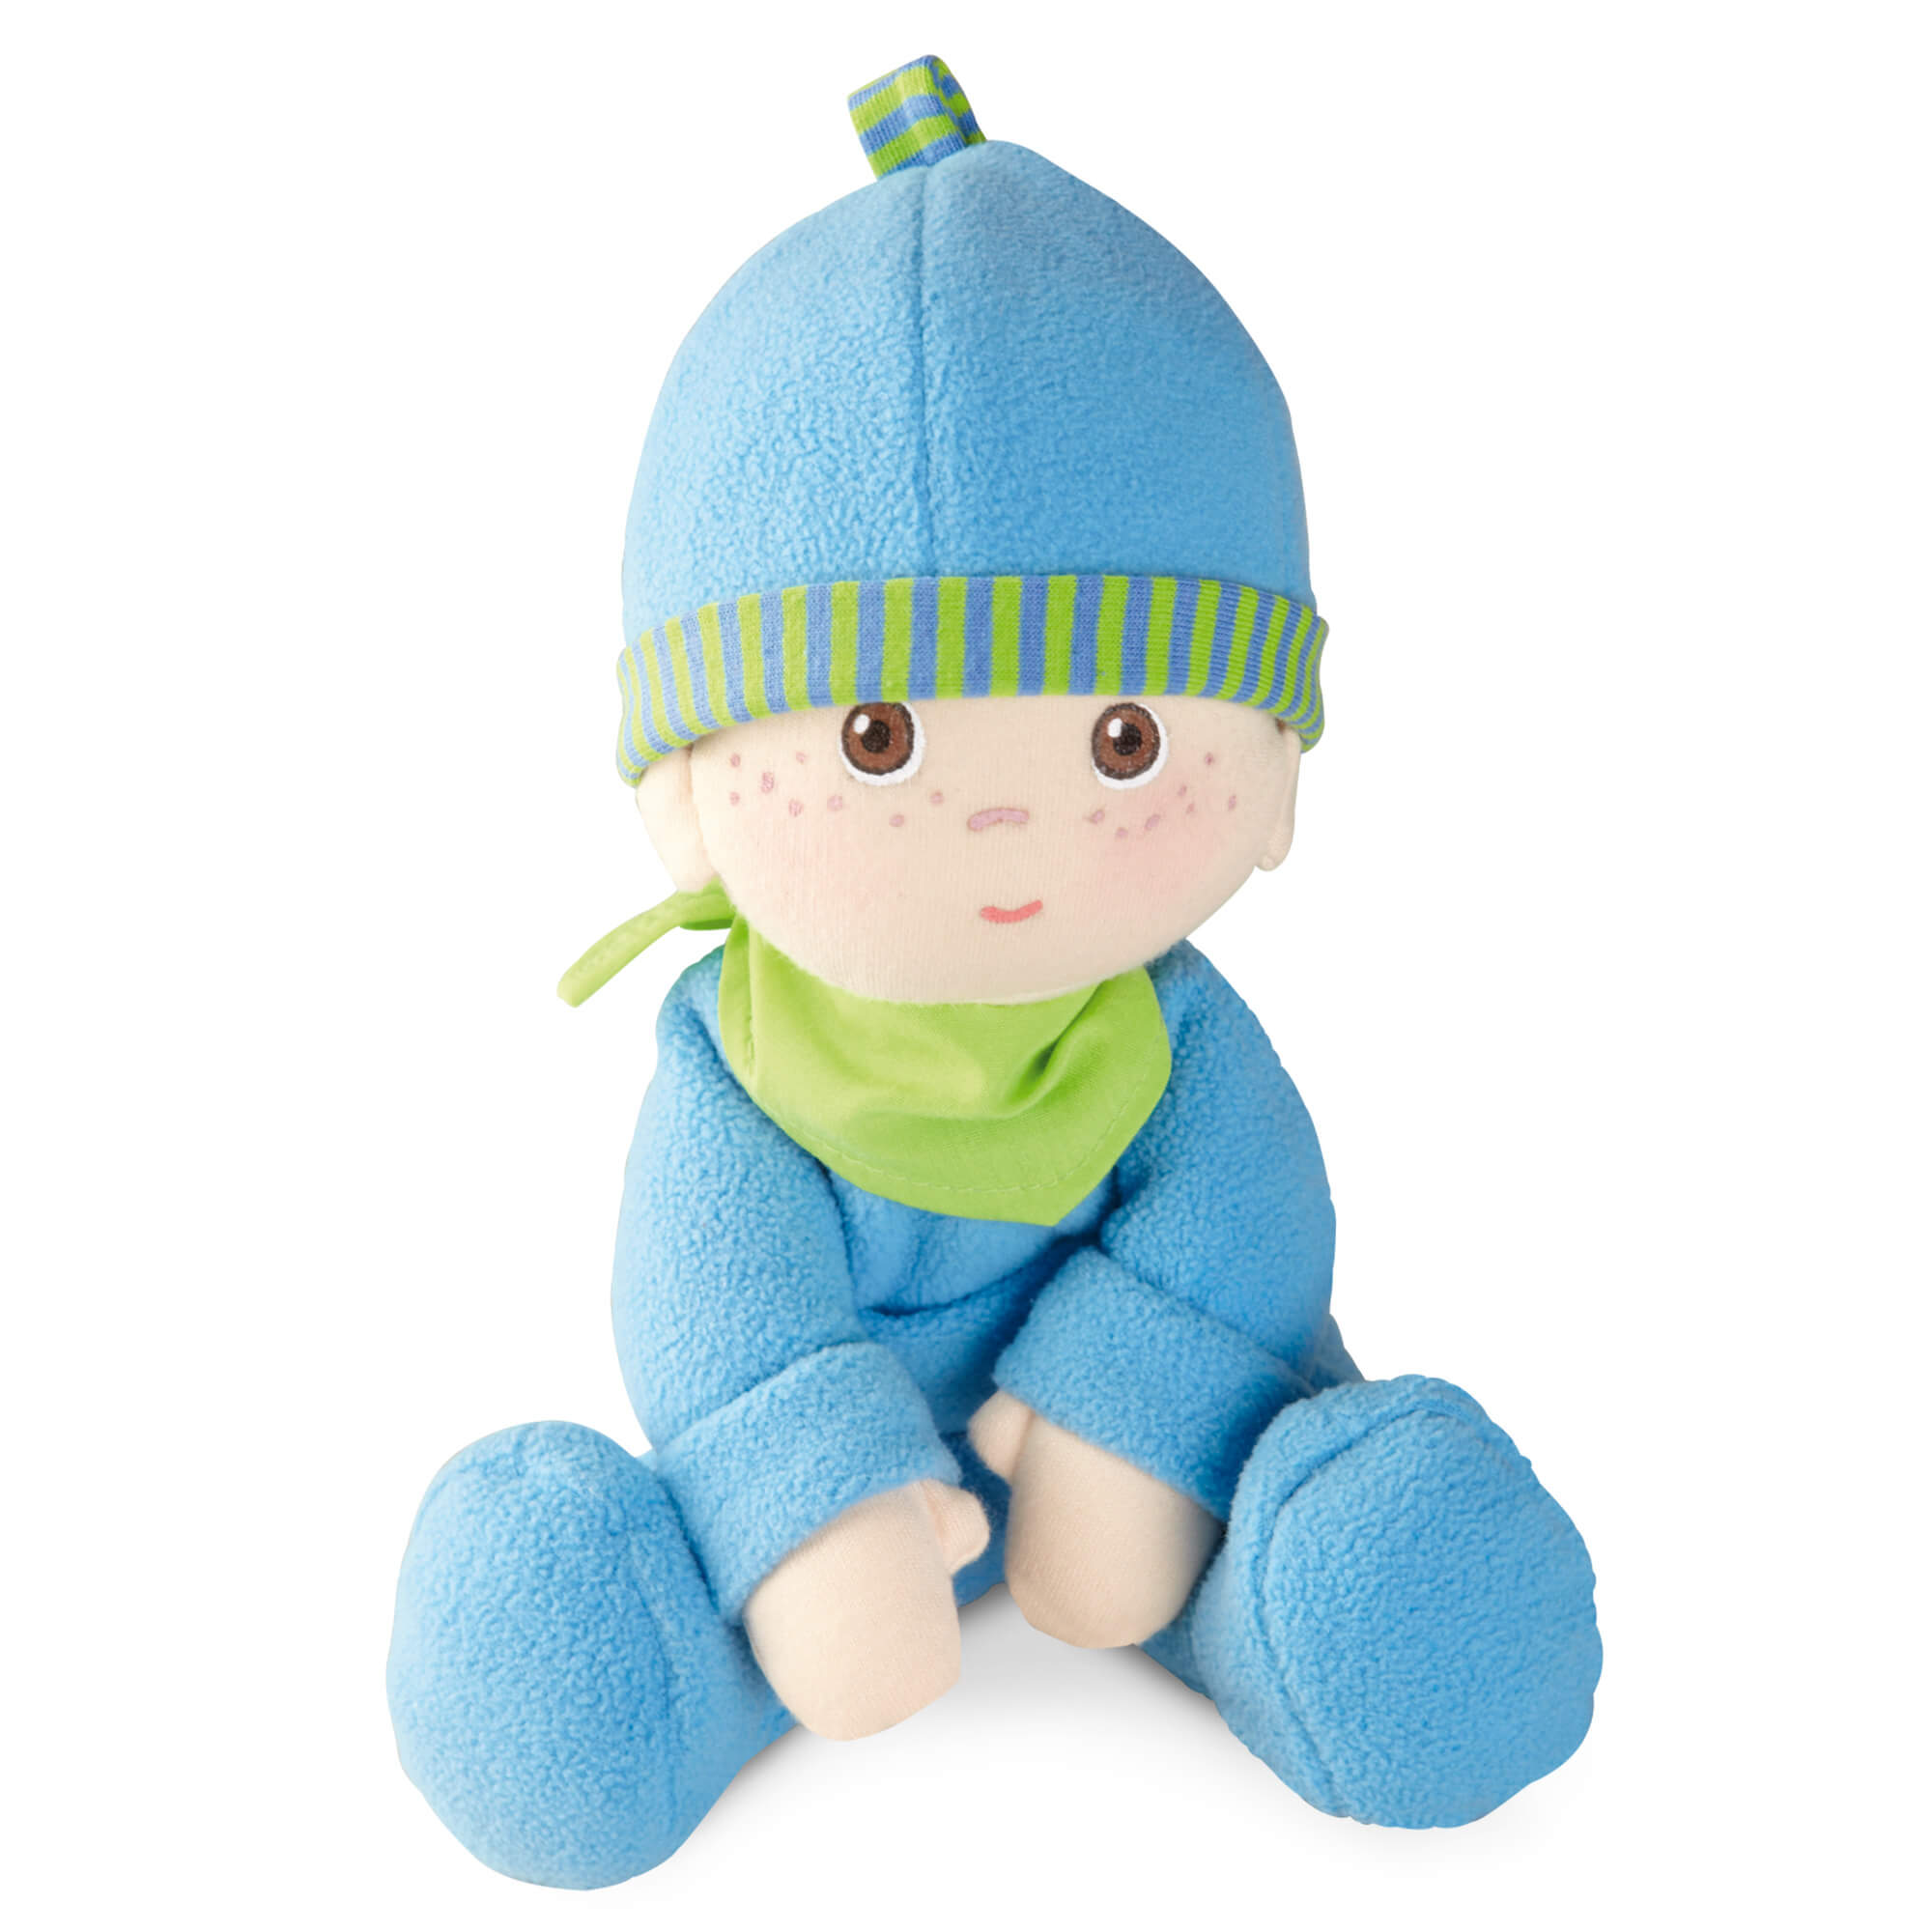 Snug Up Doll Luis 8" First Doll